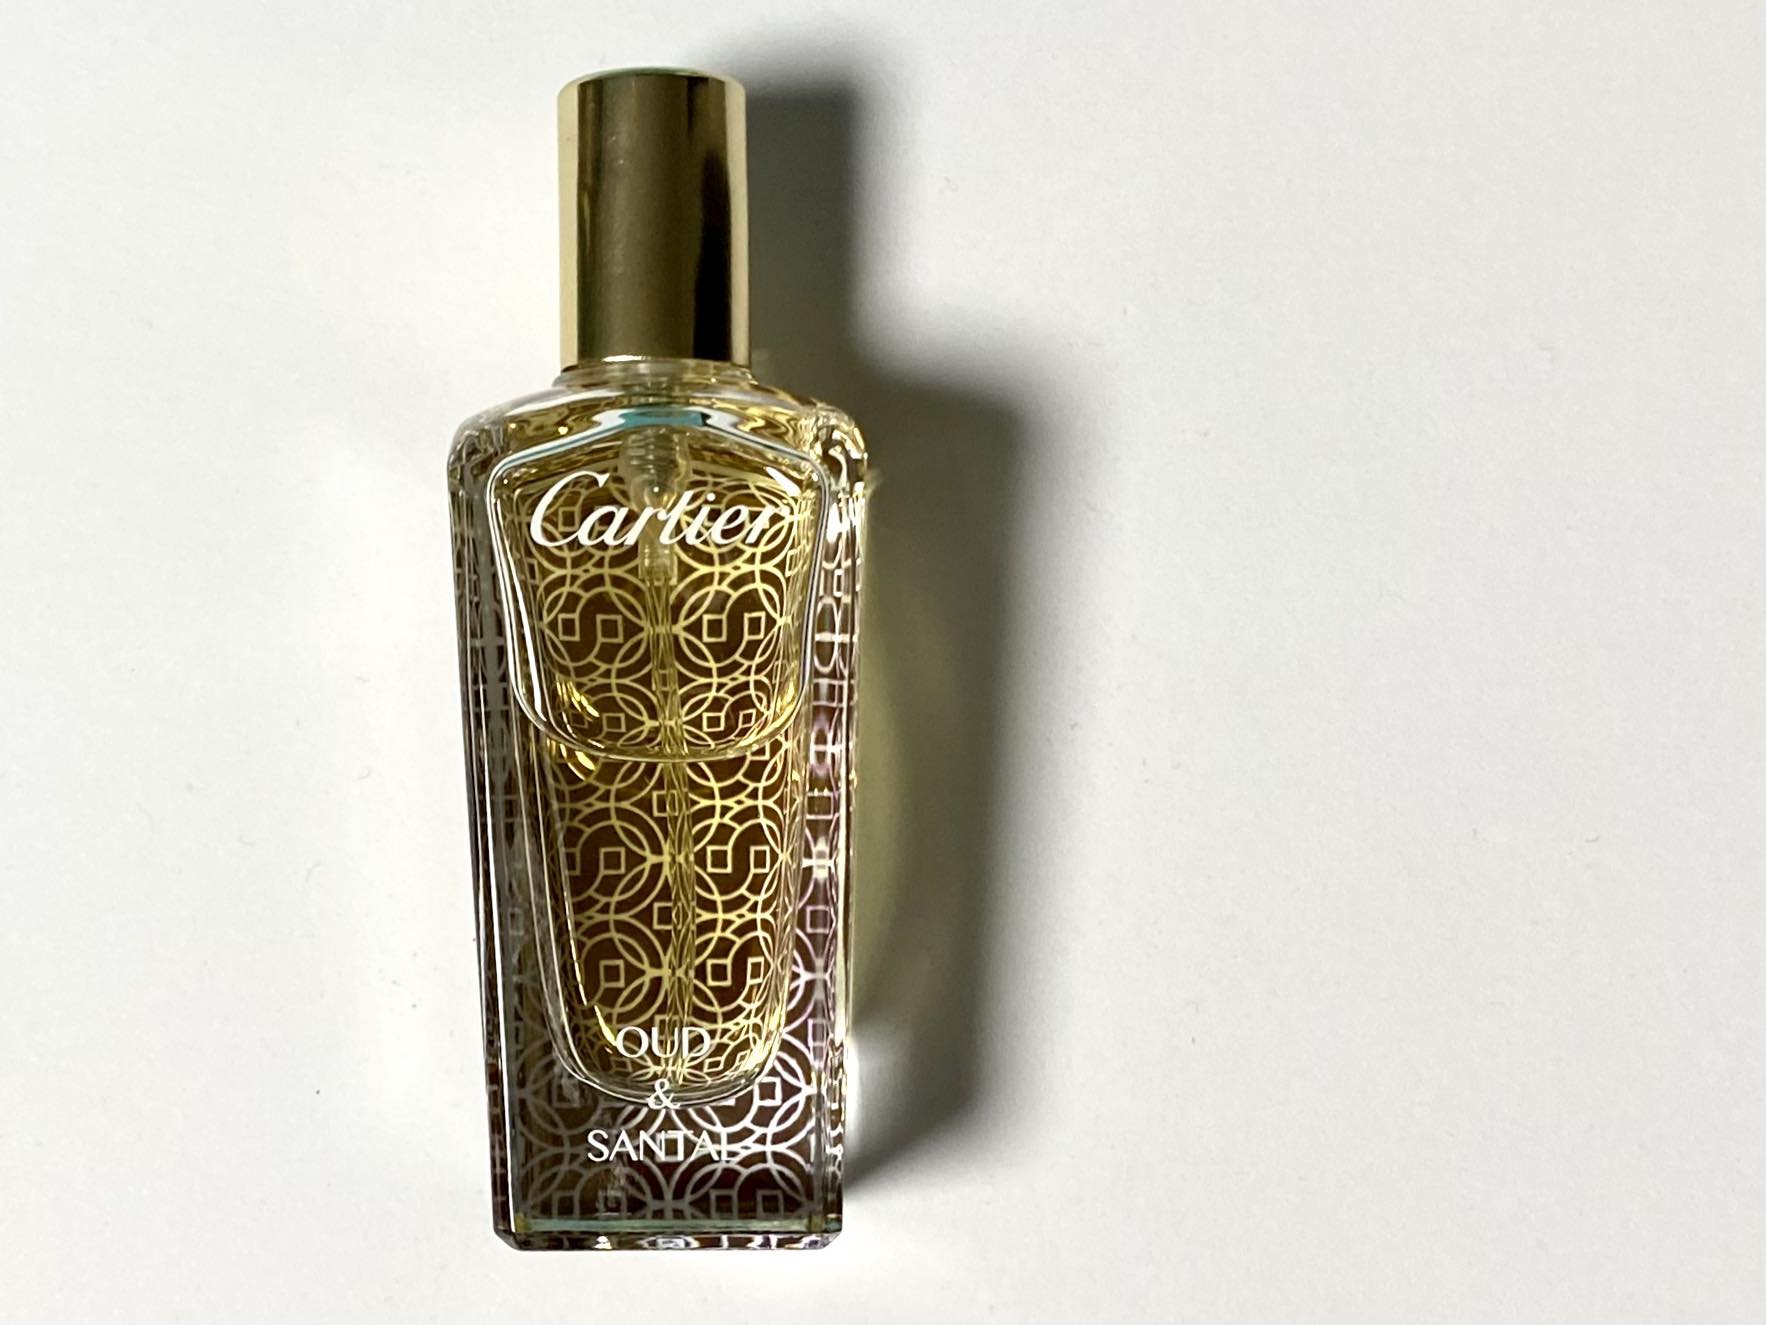 Oud and Santal by Cartier